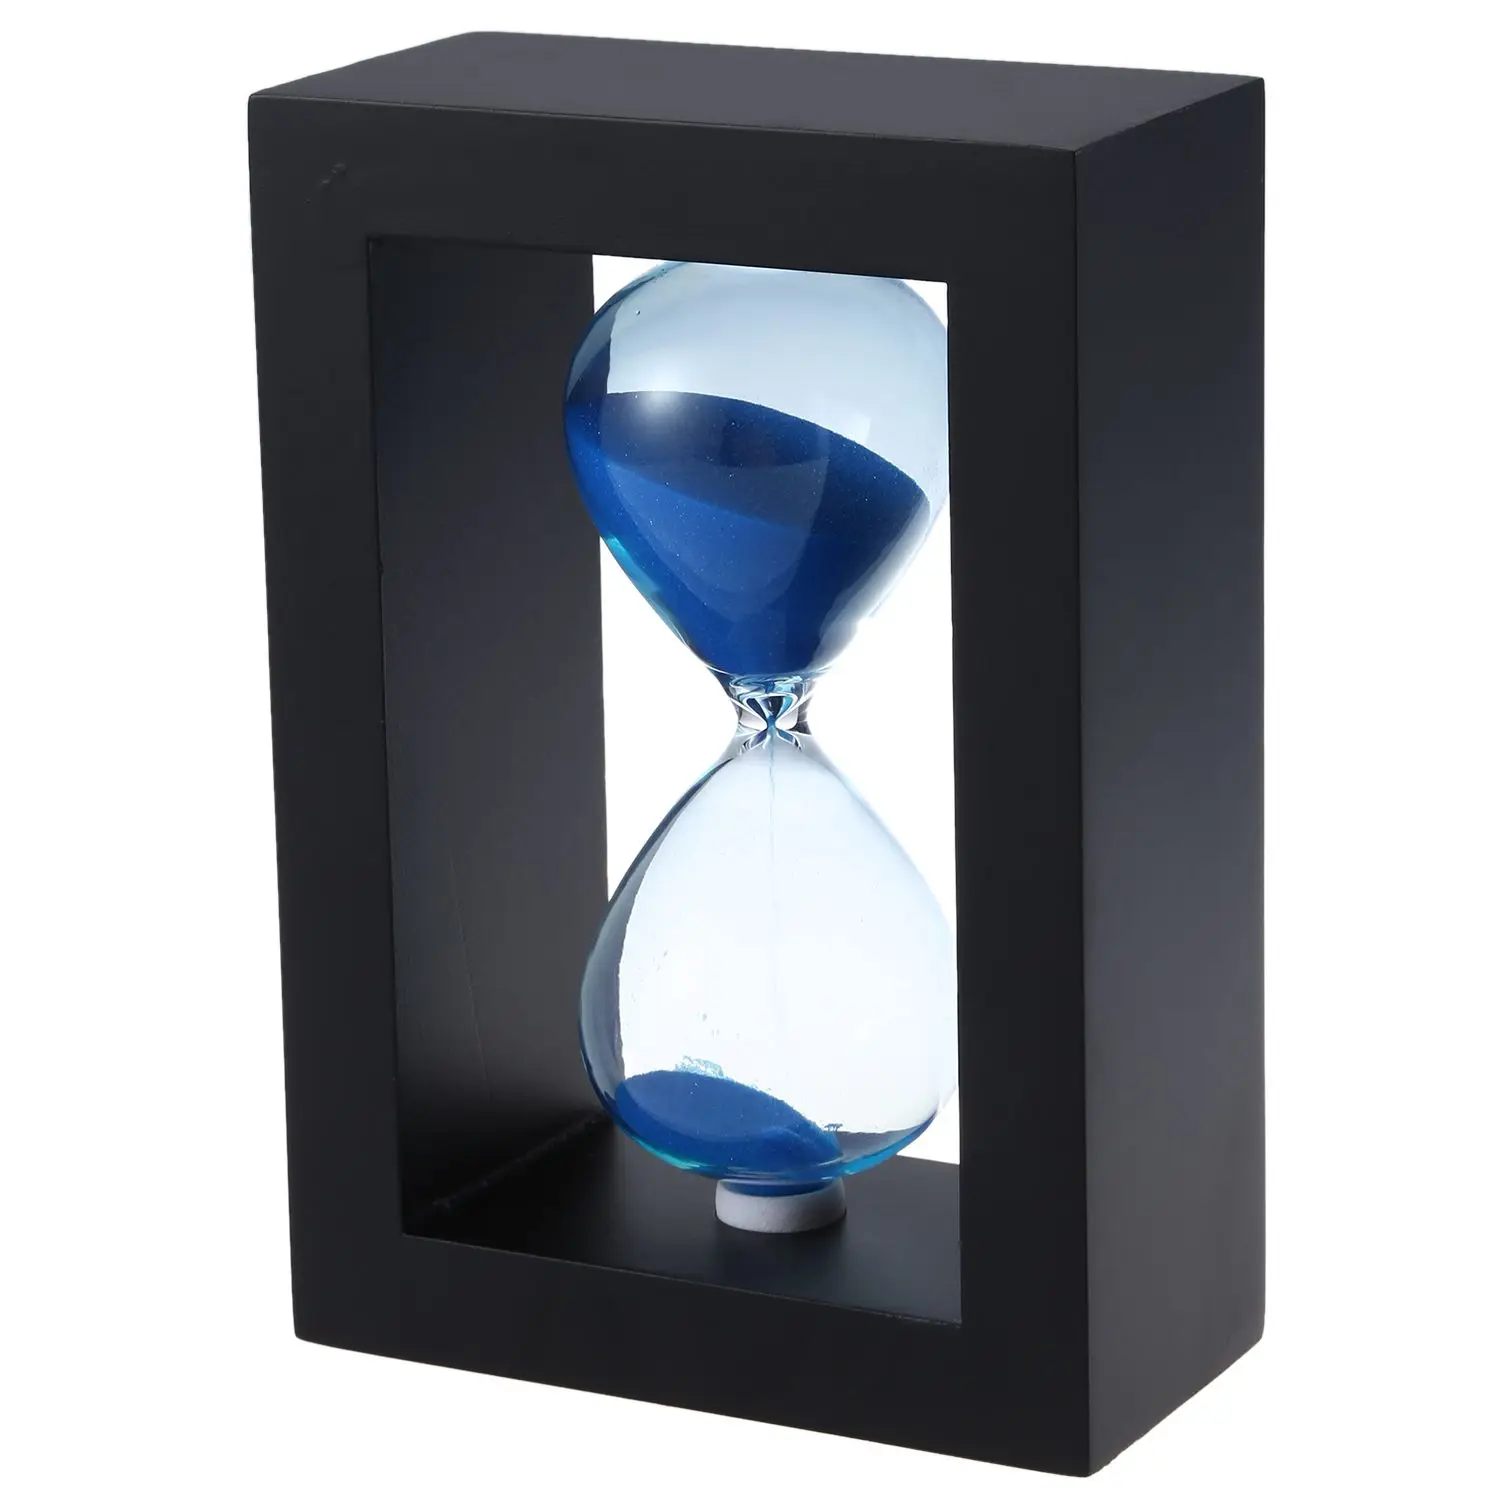 Hot Sale Wooden Frame Hourglass Sand Timer Black Frame Blue Sand.(Black Frame Blue